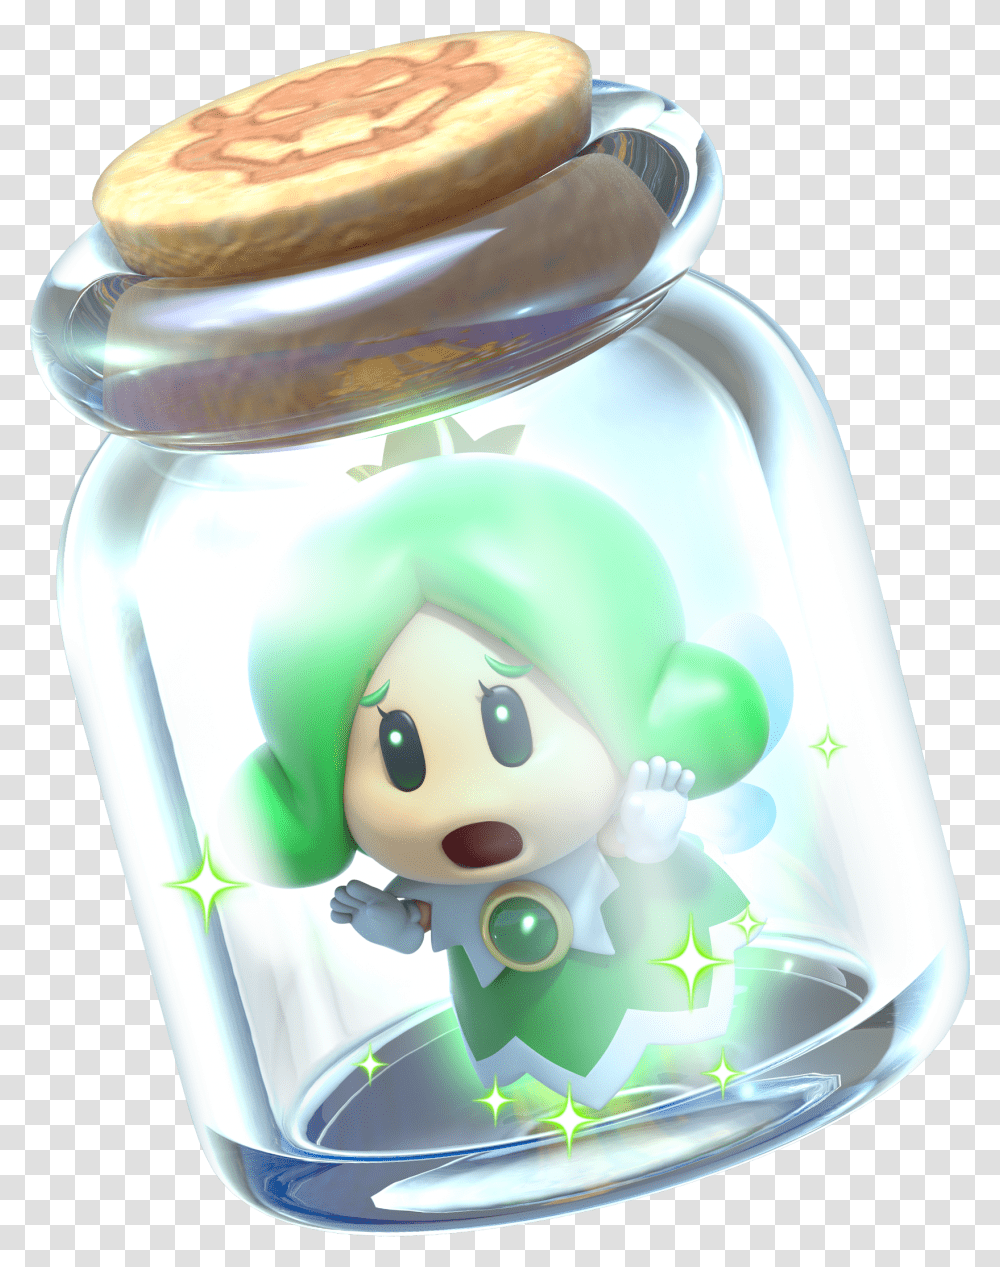 Image Result For Super Mario 3d World Sprixies Mario 3d World Fee, Bread, Food, Jar, Toy Transparent Png